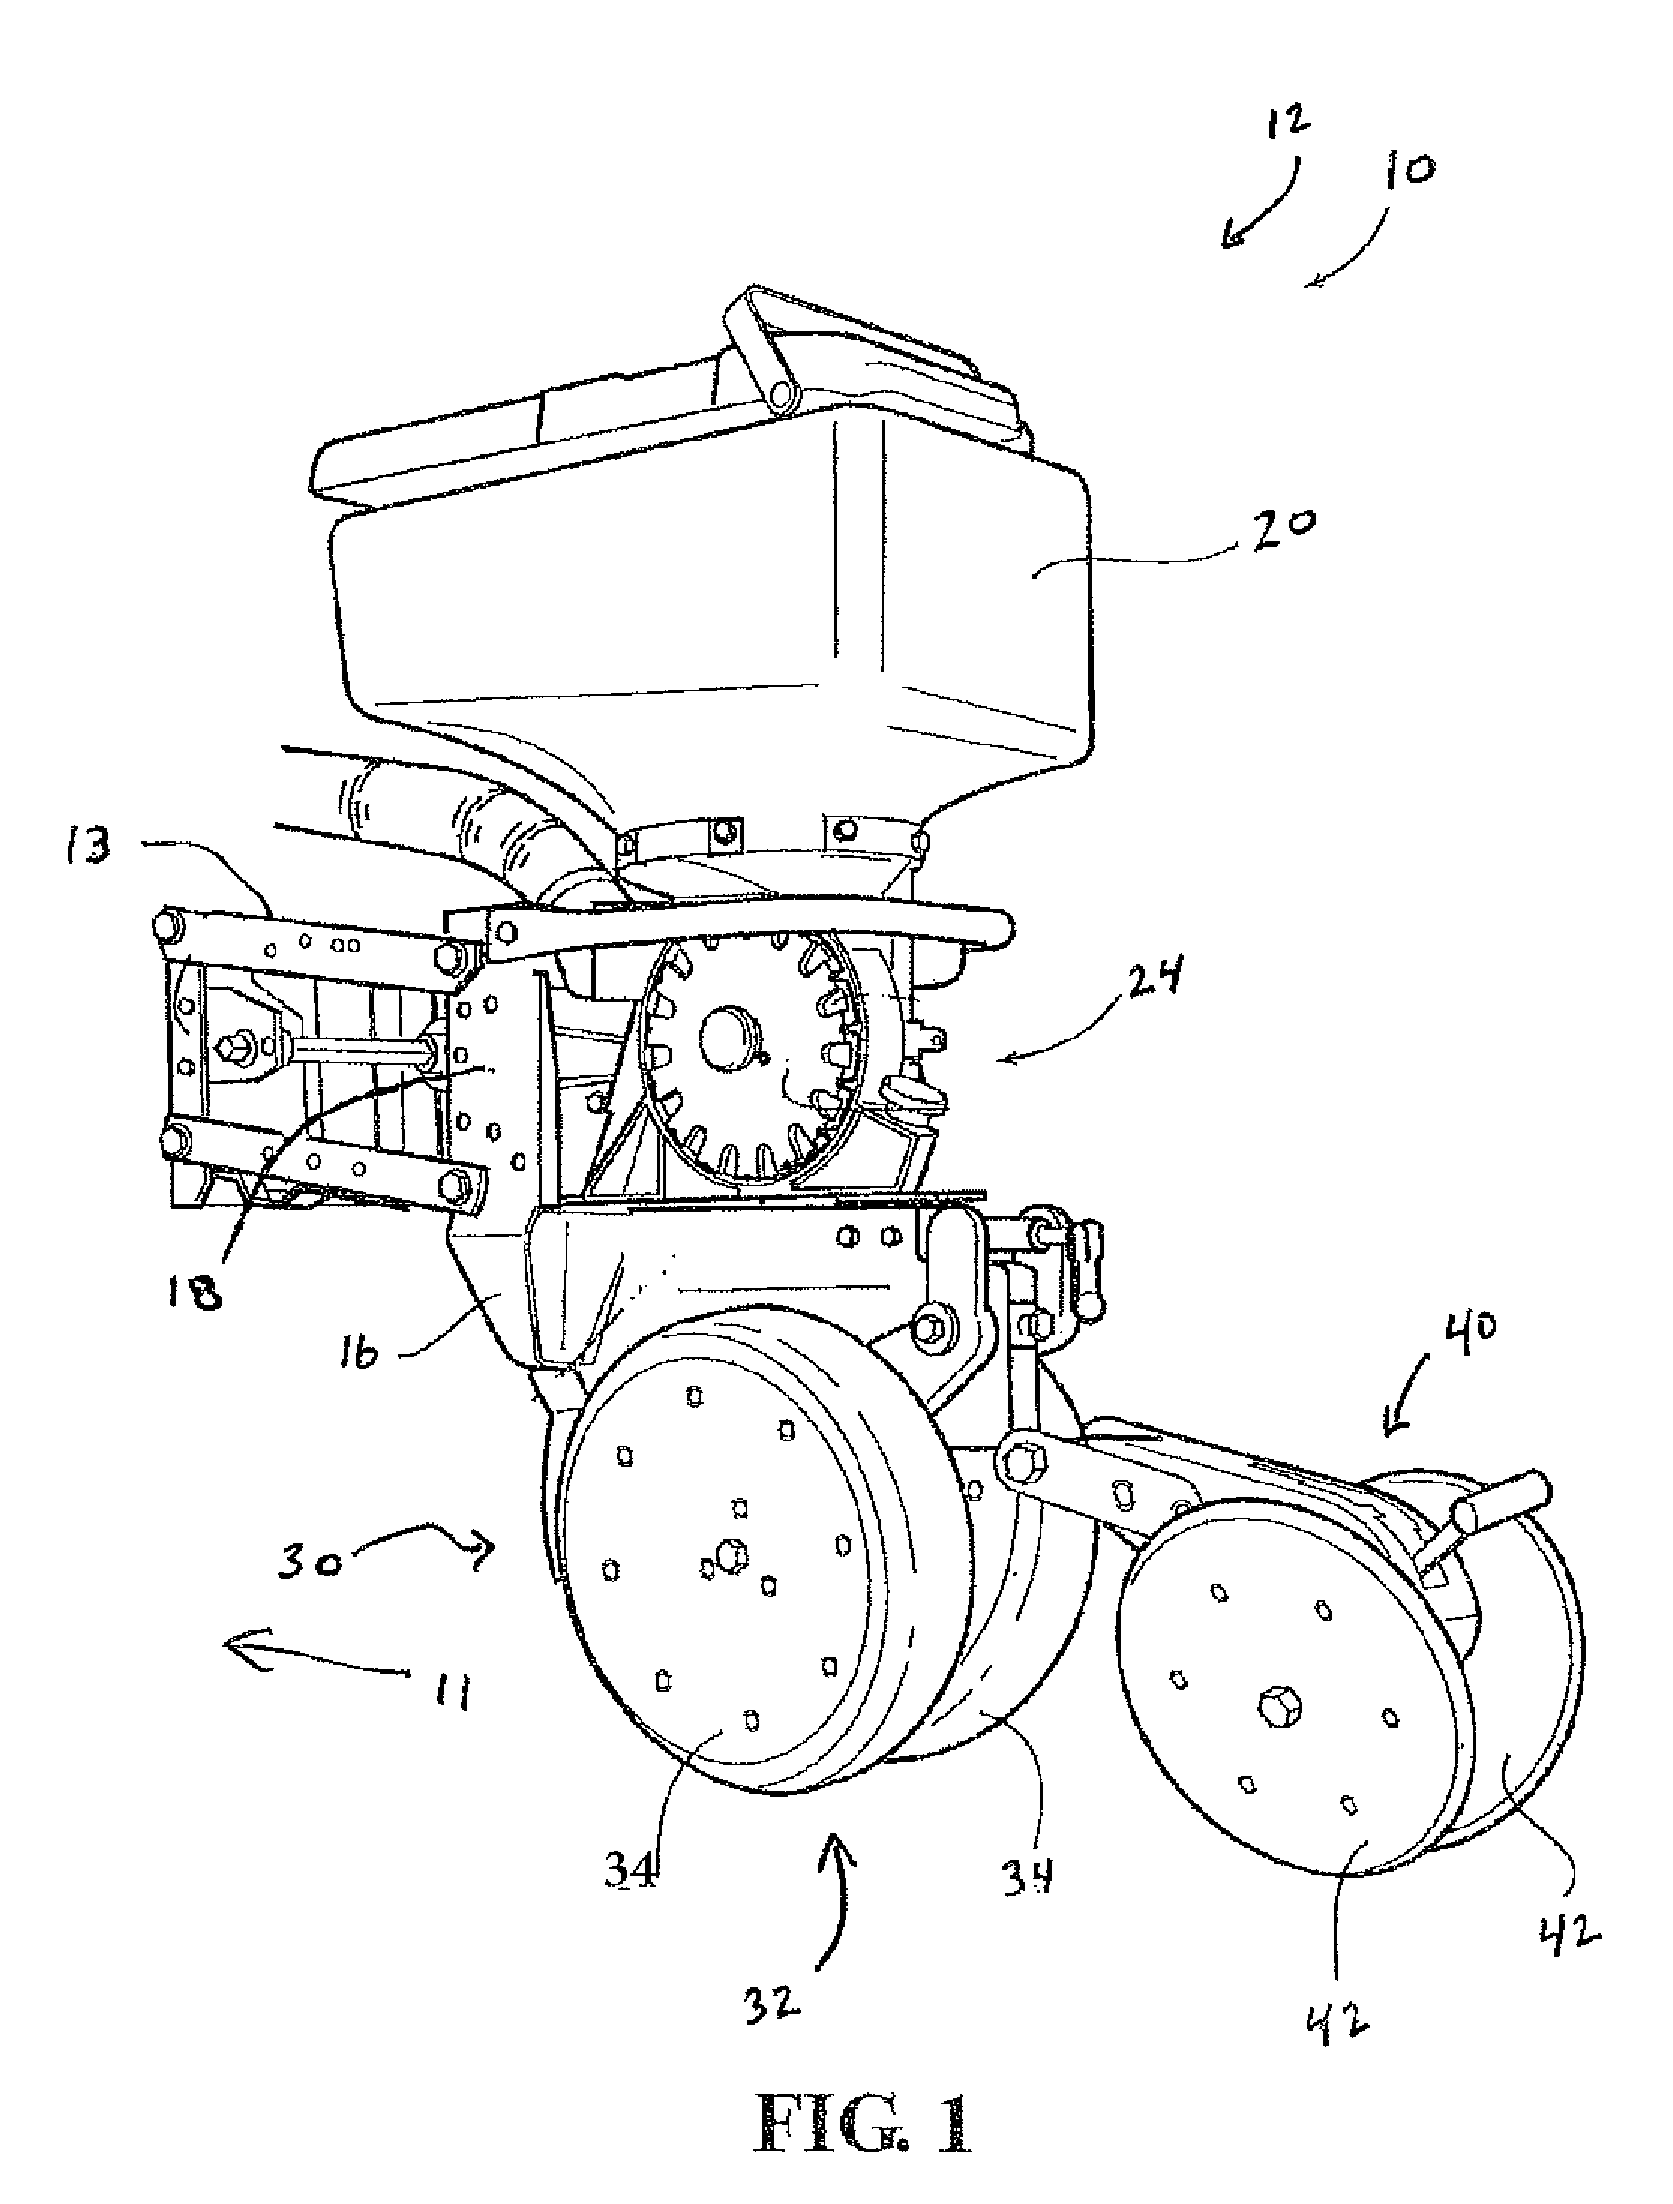 Dual belt seed delivery mechanism